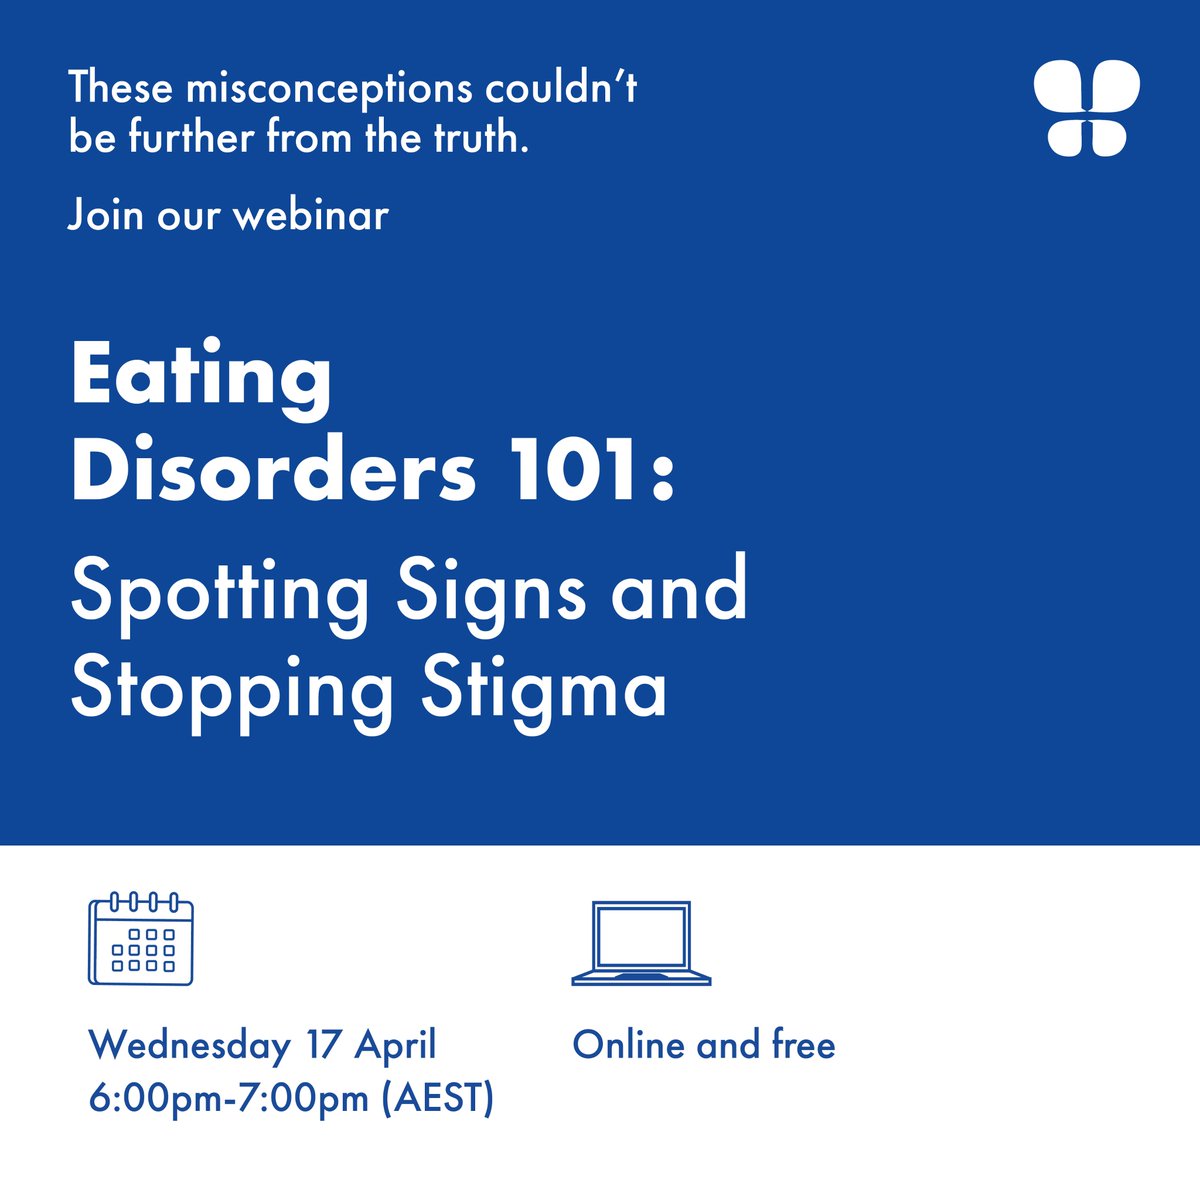 Our latest research has revealed a gap in understanding of eating disorders in Aus. Join our webinar 'Eating Disorders 101: Spotting signs & stopping stigma' on Wed 17 April 6-7pm to hear to why these misconceptions couldn't be further from the truth.⬇️ butterfly-org-au.zoom.us/webinar/regist…